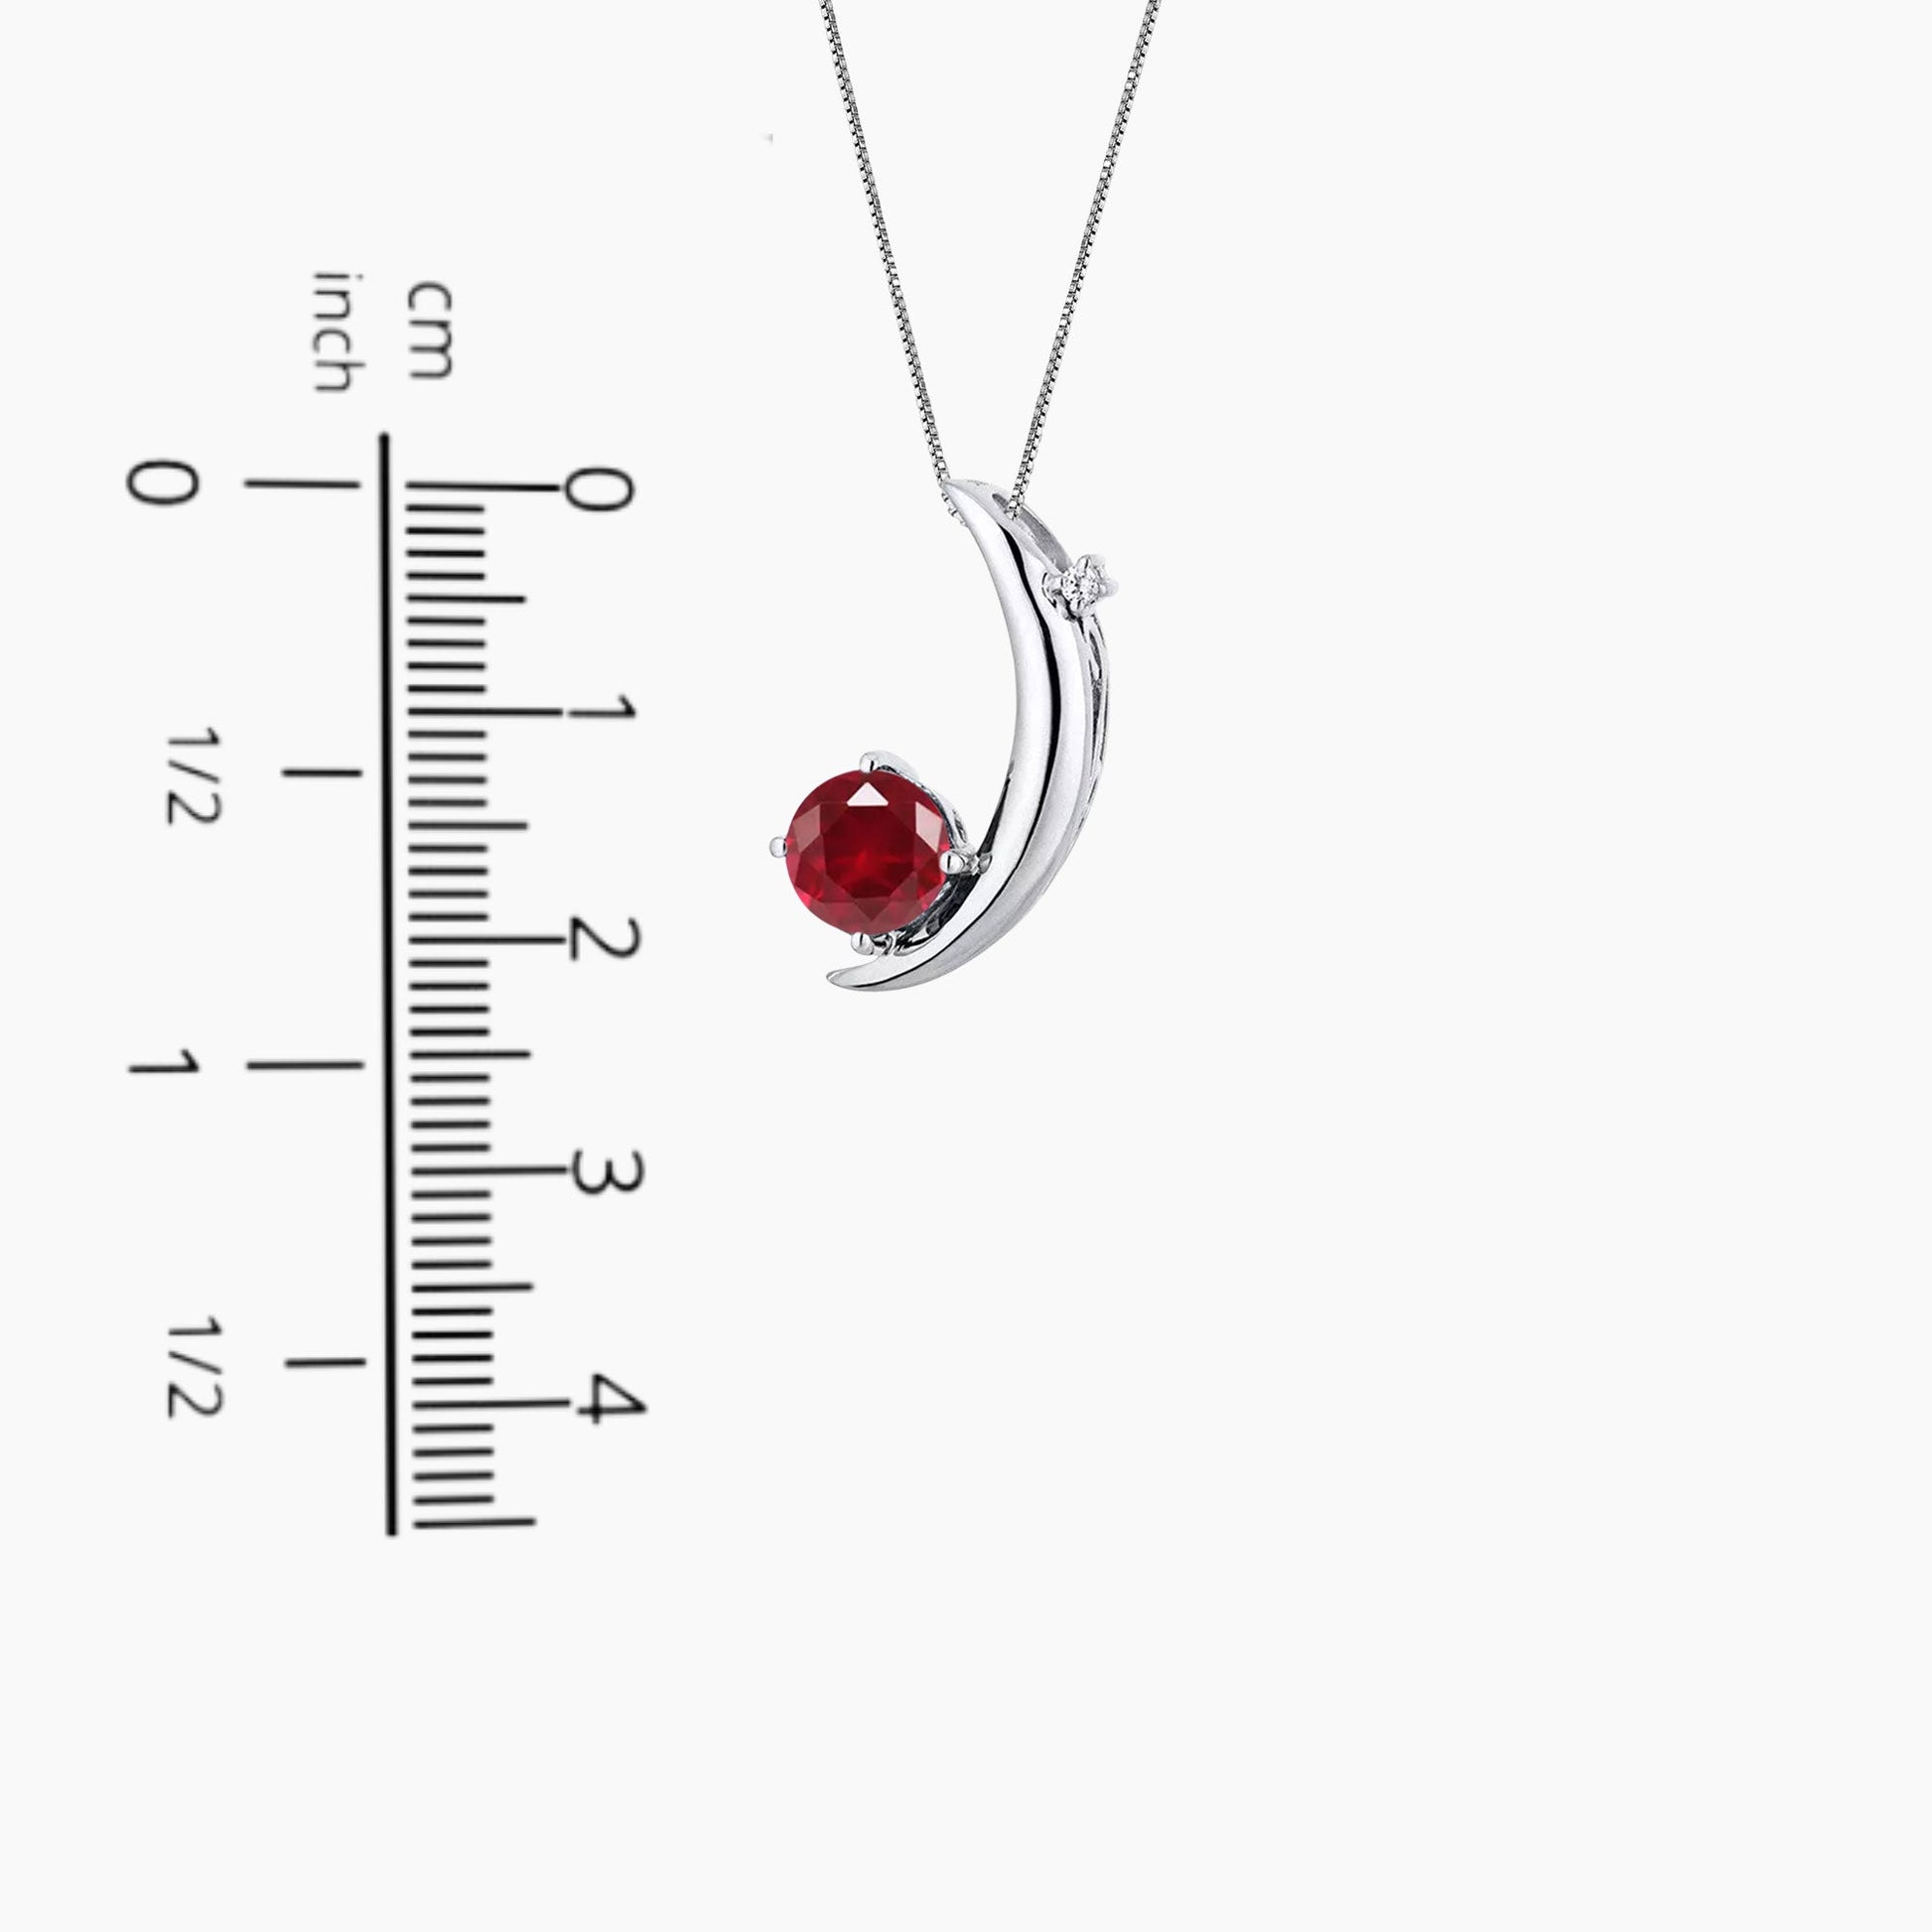  Find your perfect fit with our Half Moon Pendant Necklace sizing guide.